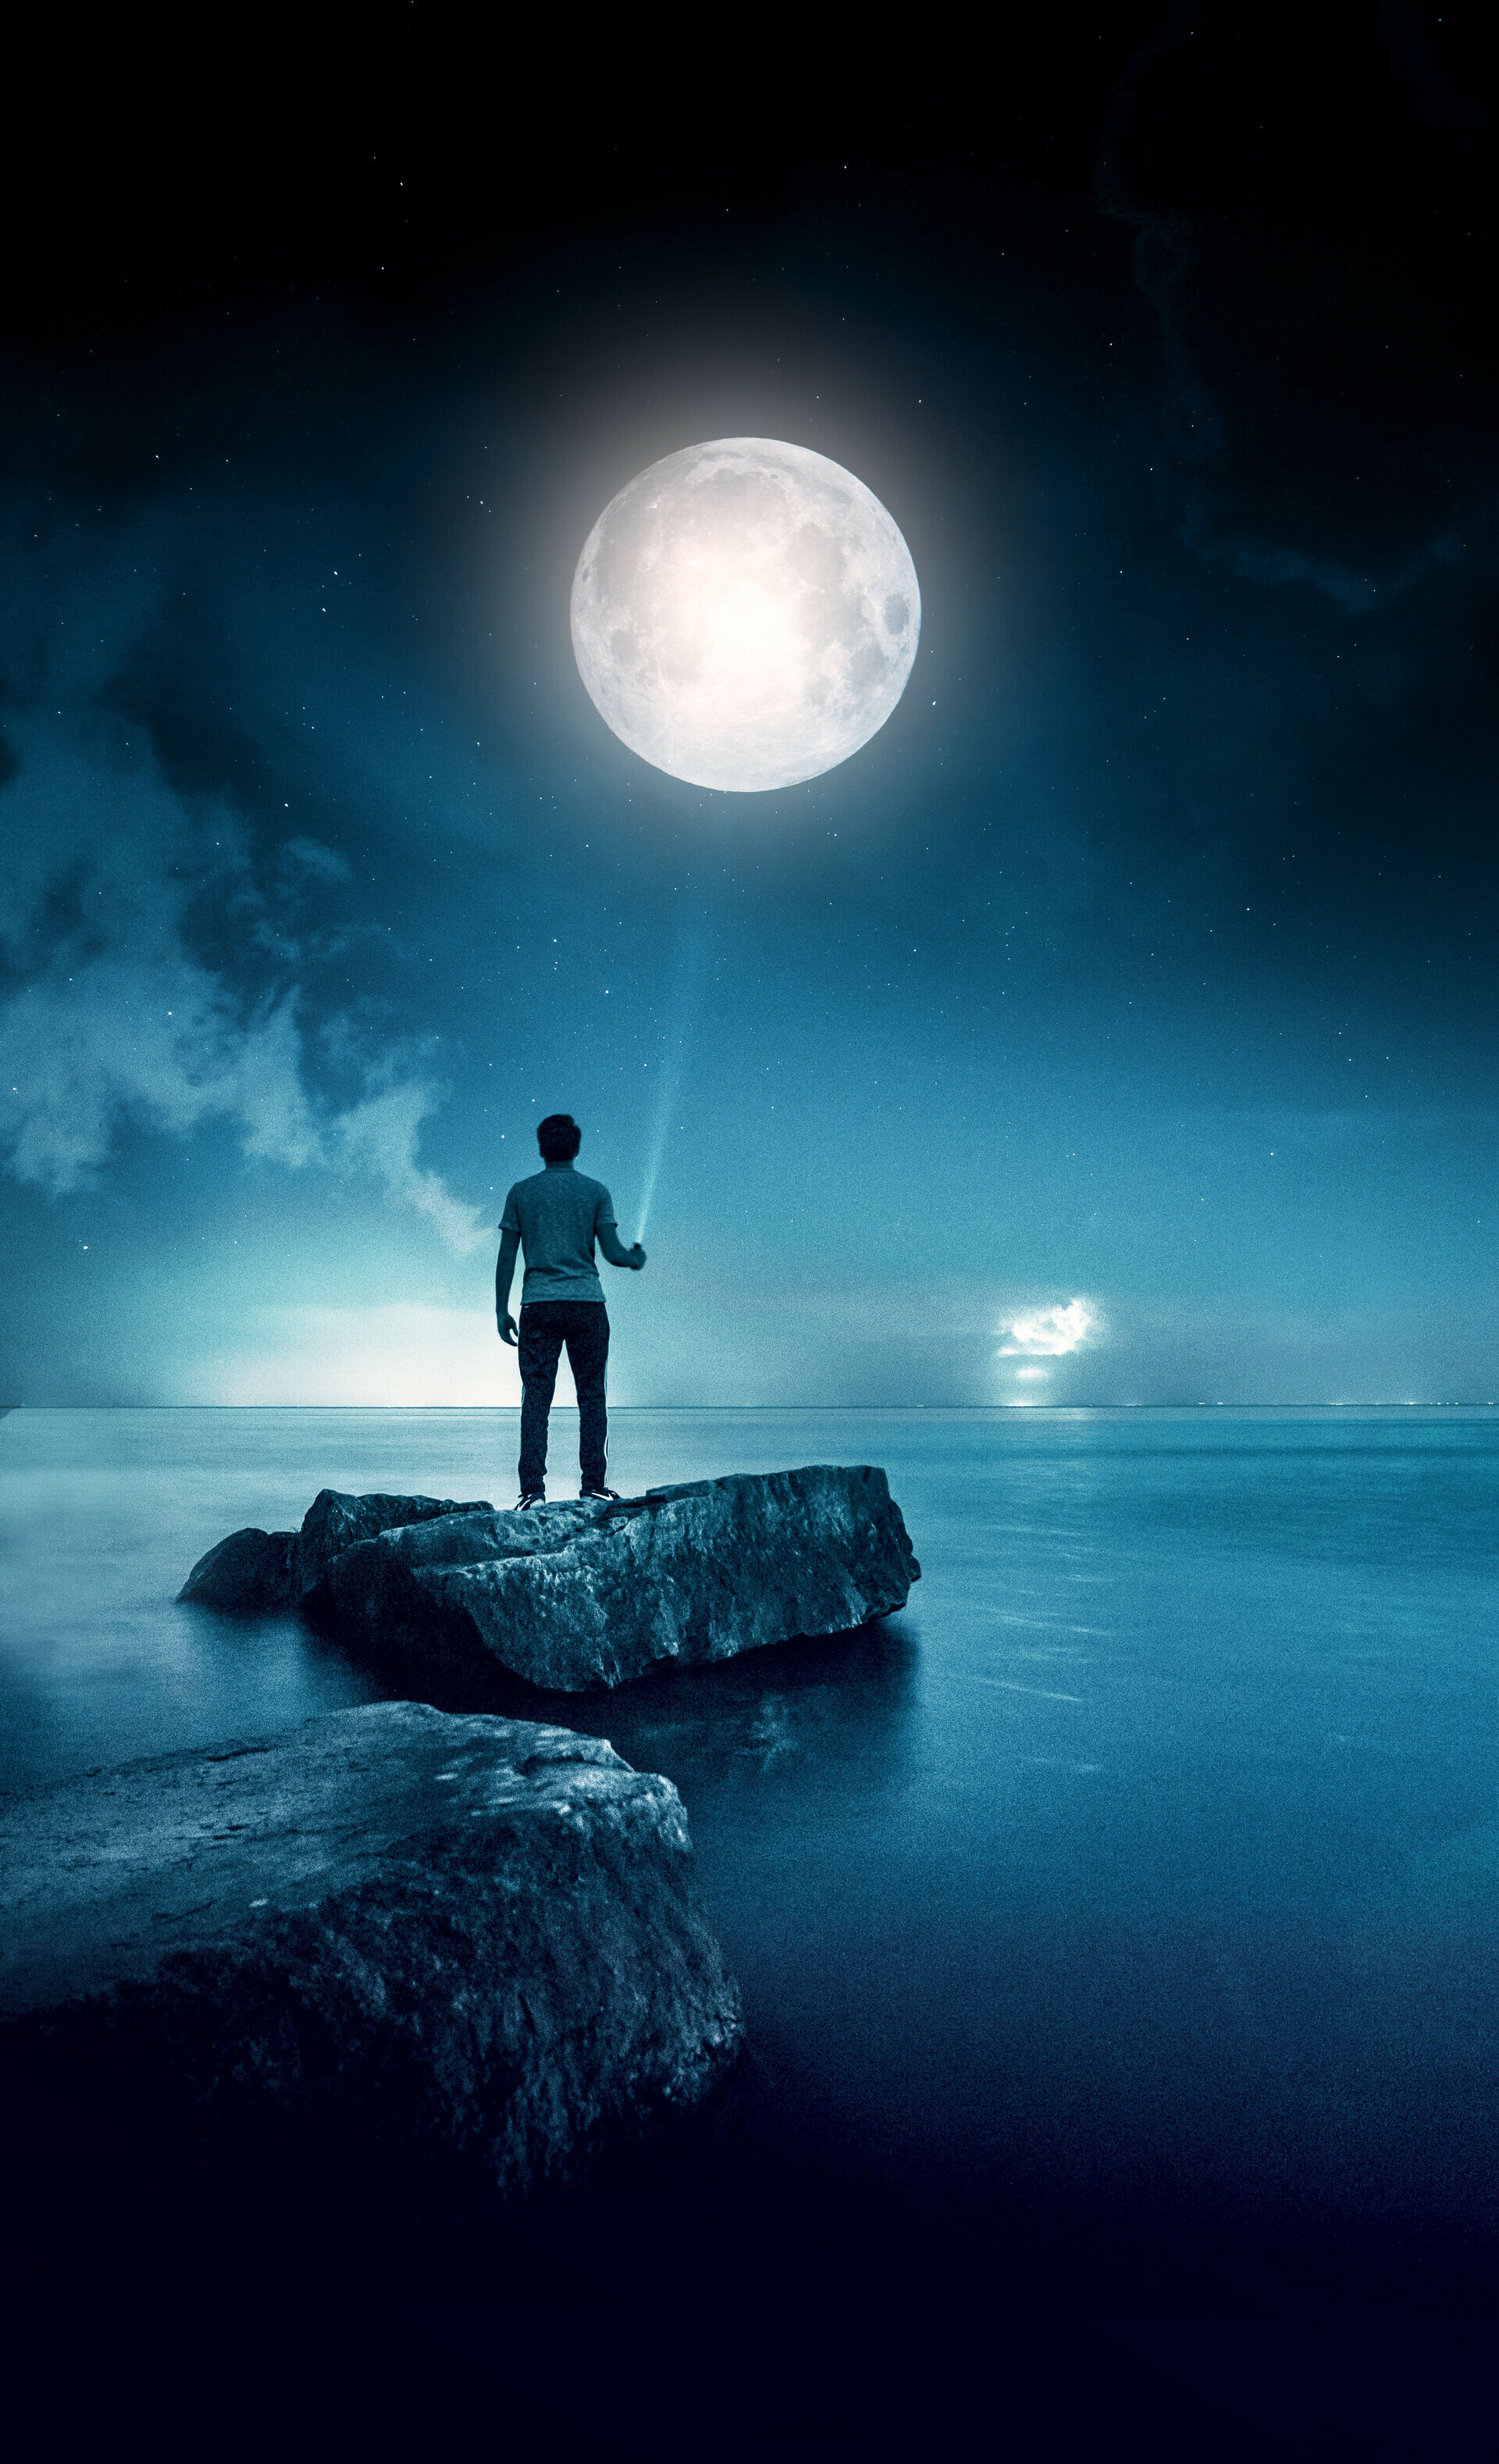 Moonlight: Natural light sources in a night sky, Starlight, Airglow. 1920x3160 HD Background.